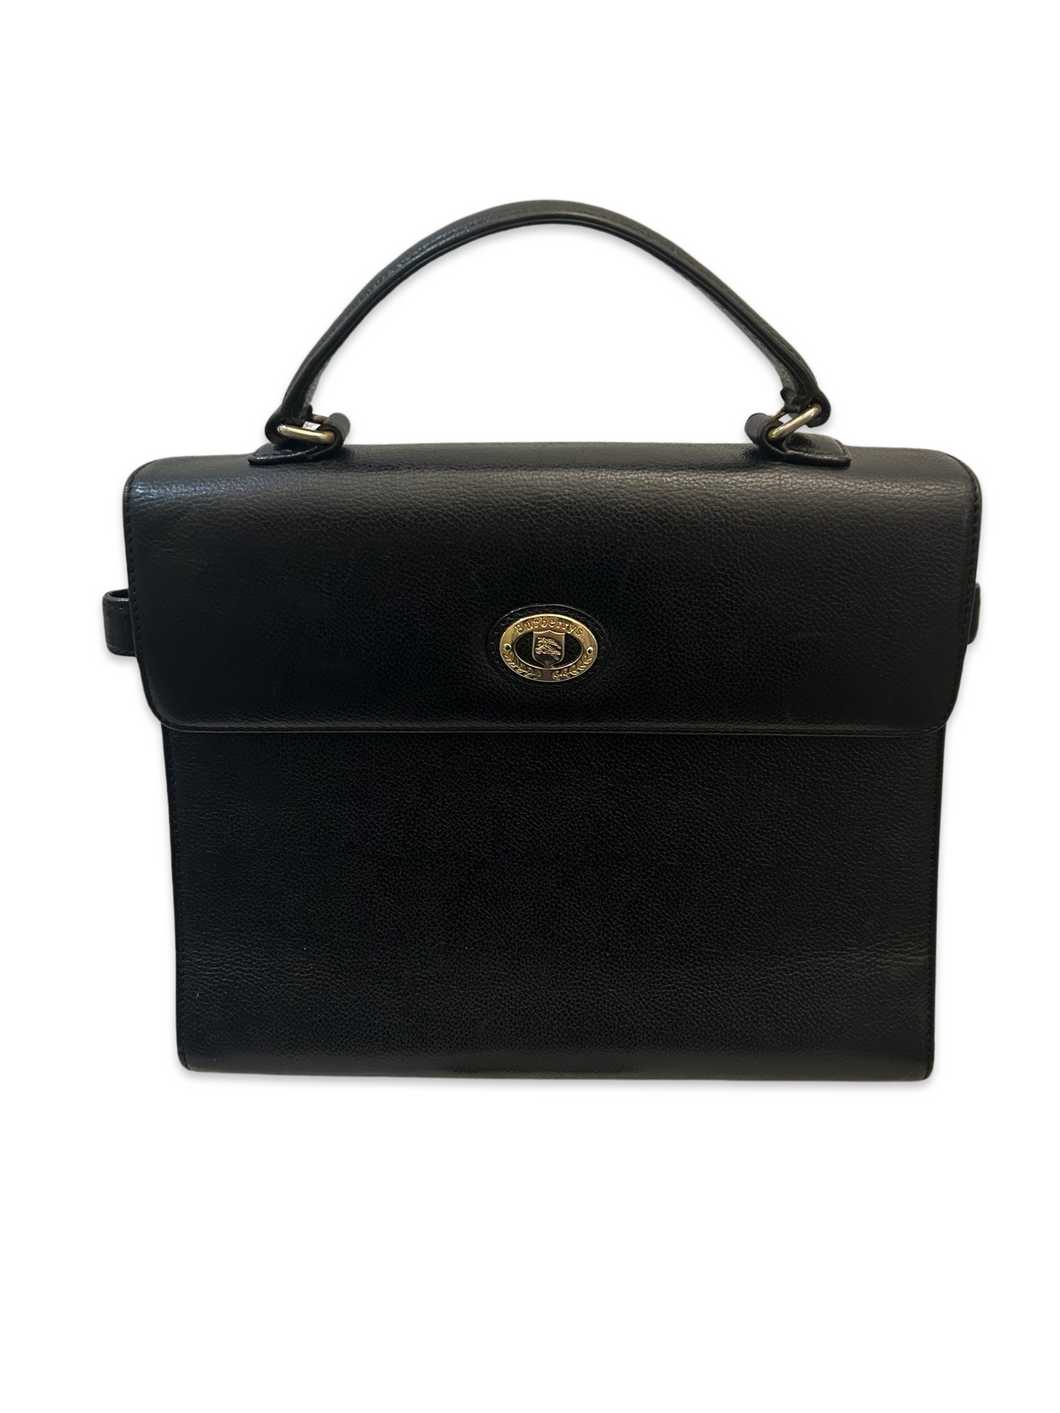 Burberry Vintage Black Leather Small Satchel / Briefcase